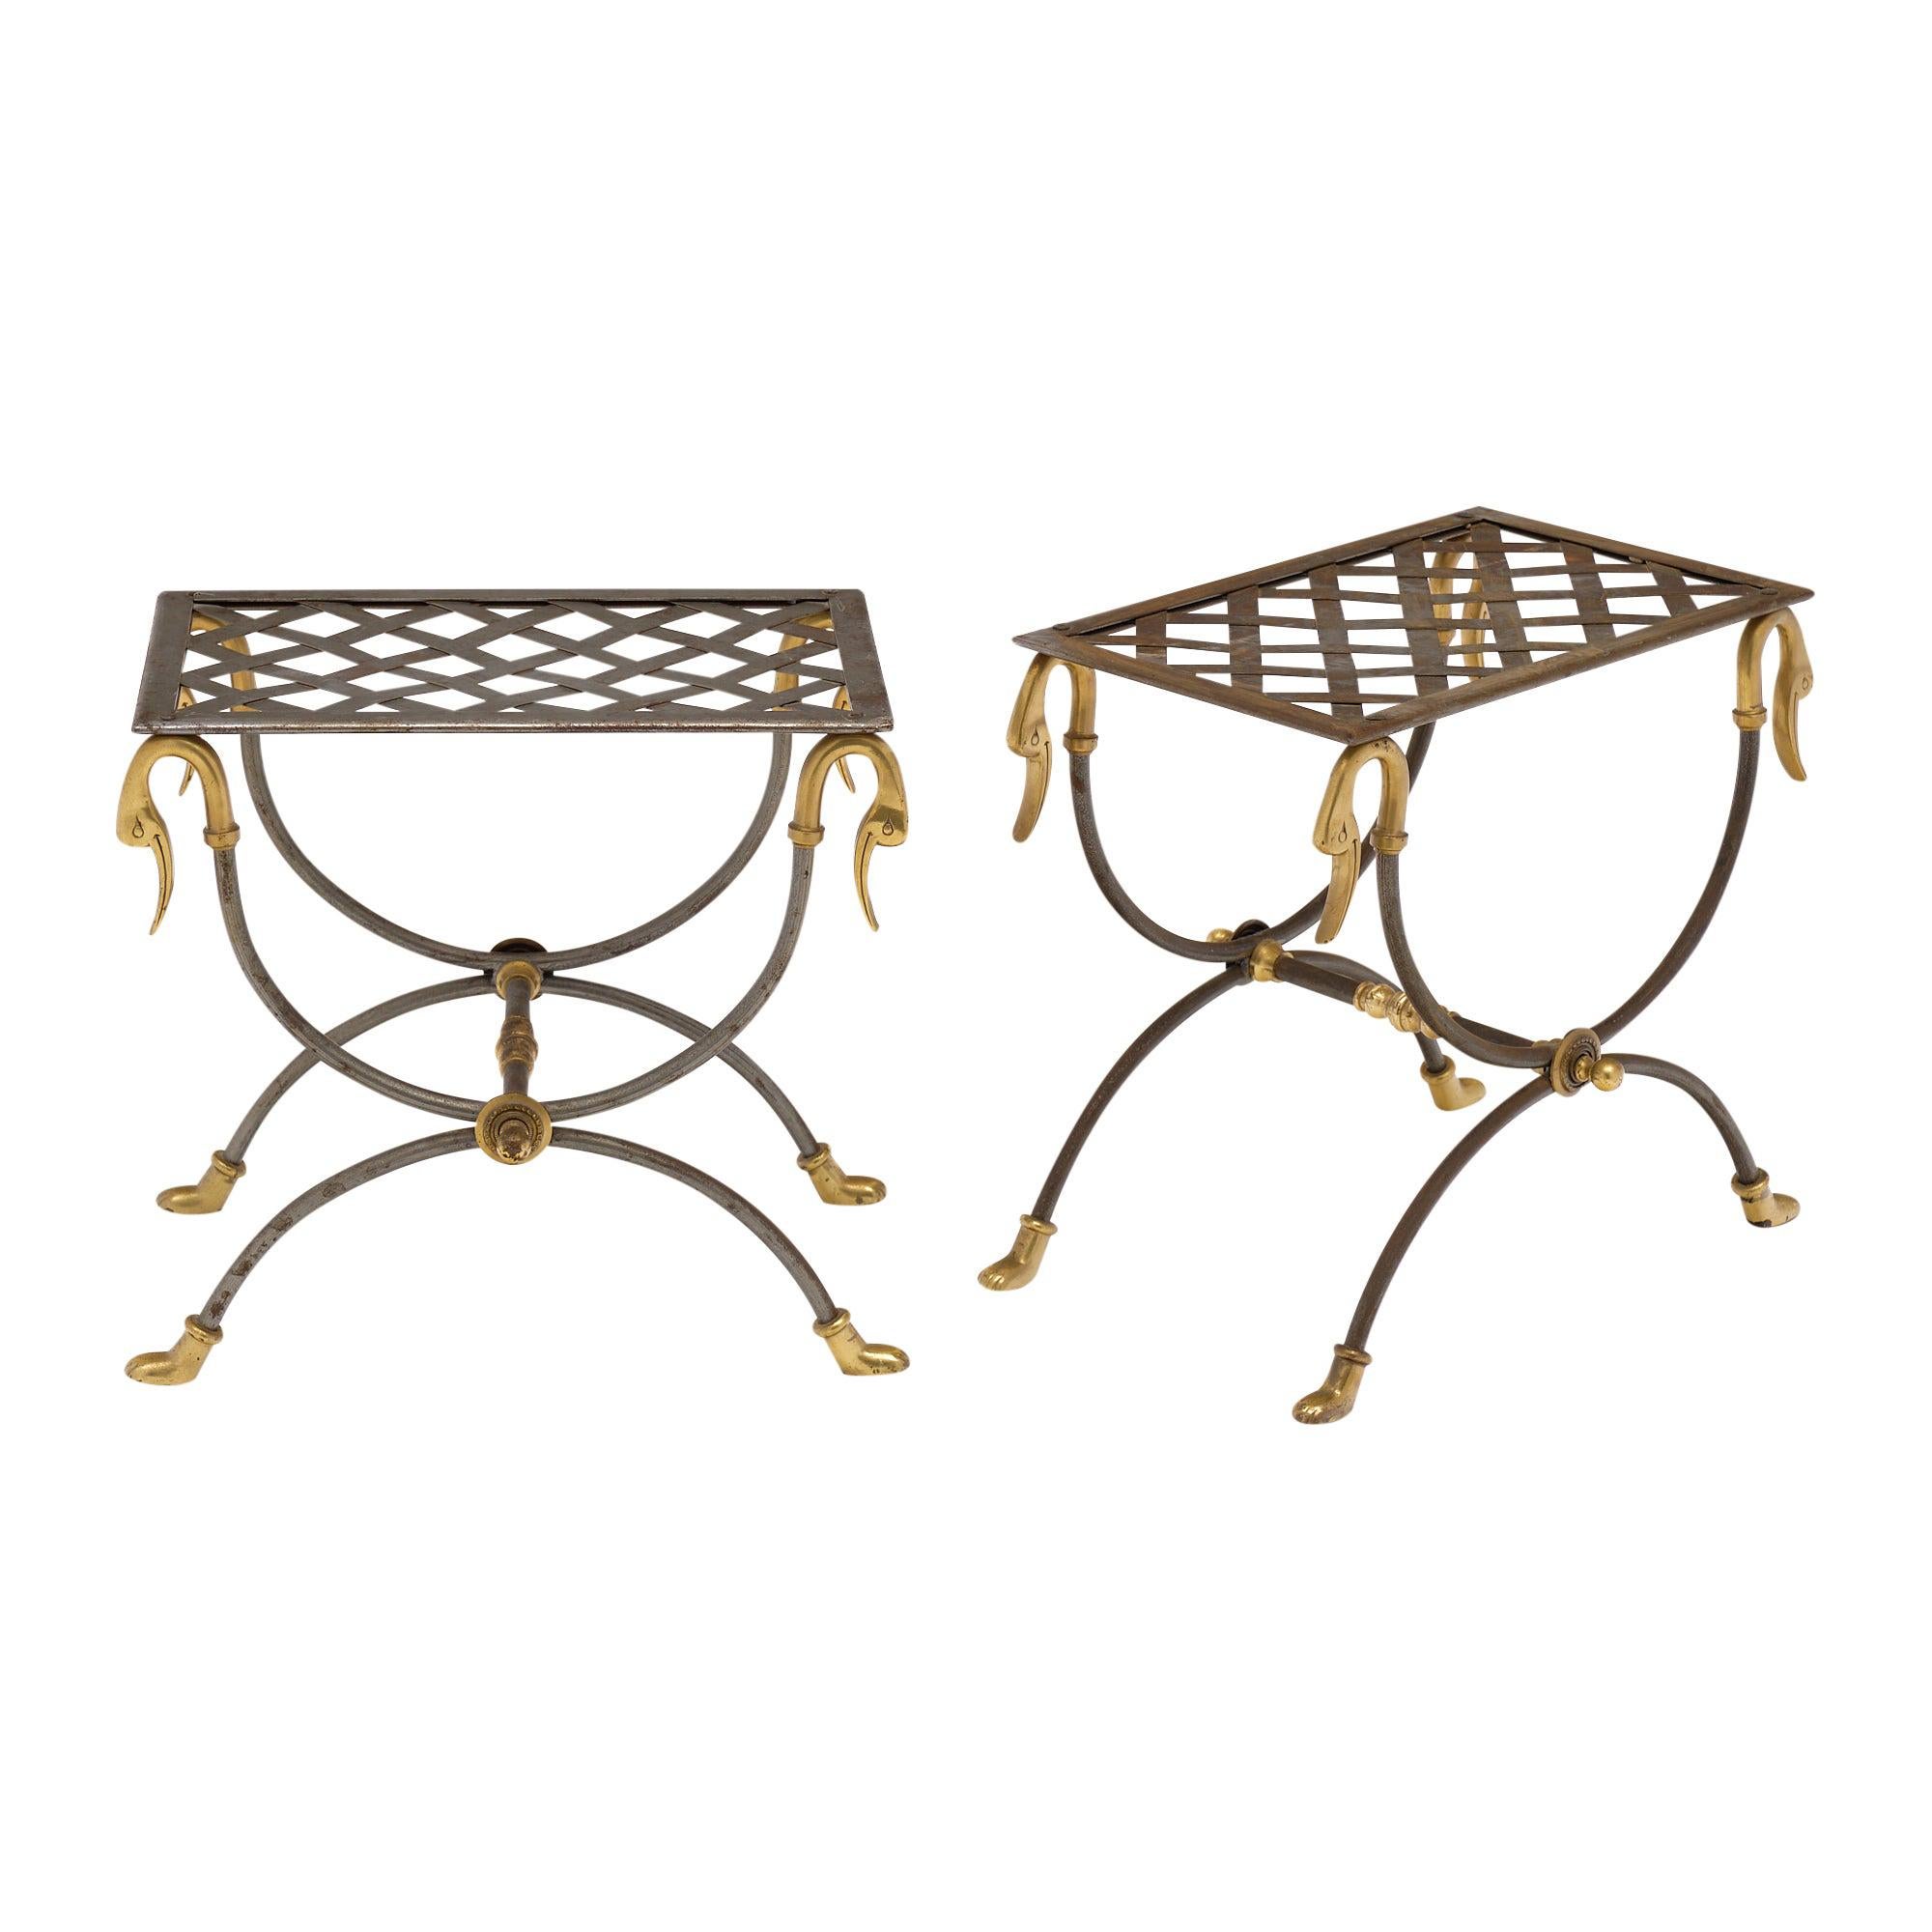 Pair of French “Curule” Stools